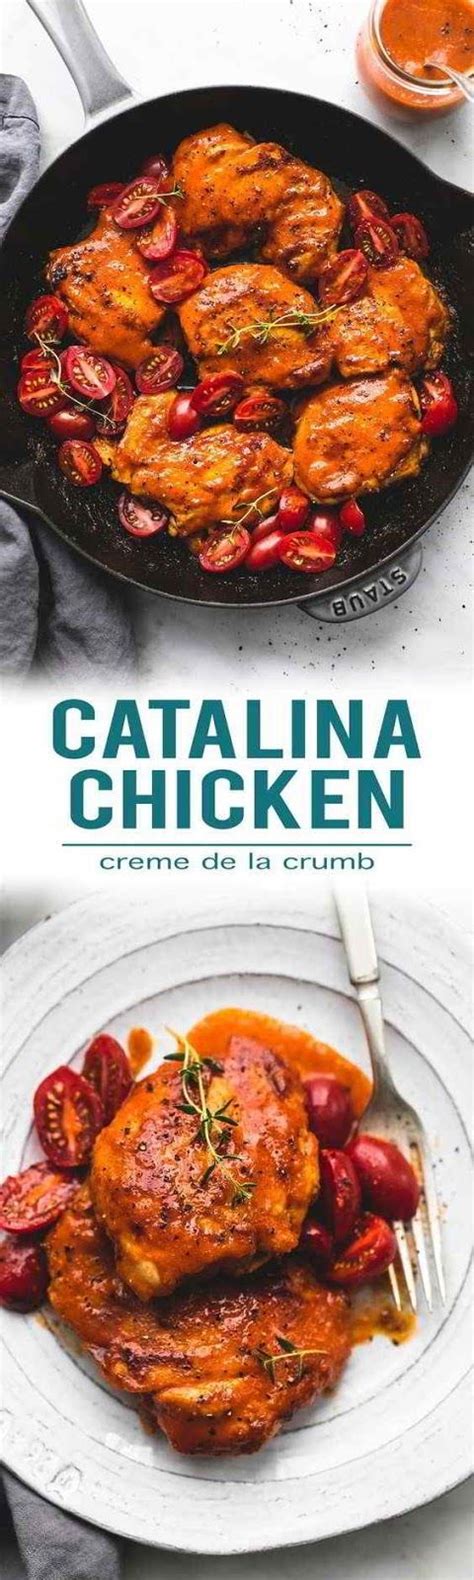 Catalina Chicken This Recipe Is Very Very Tasty And Easy To Make